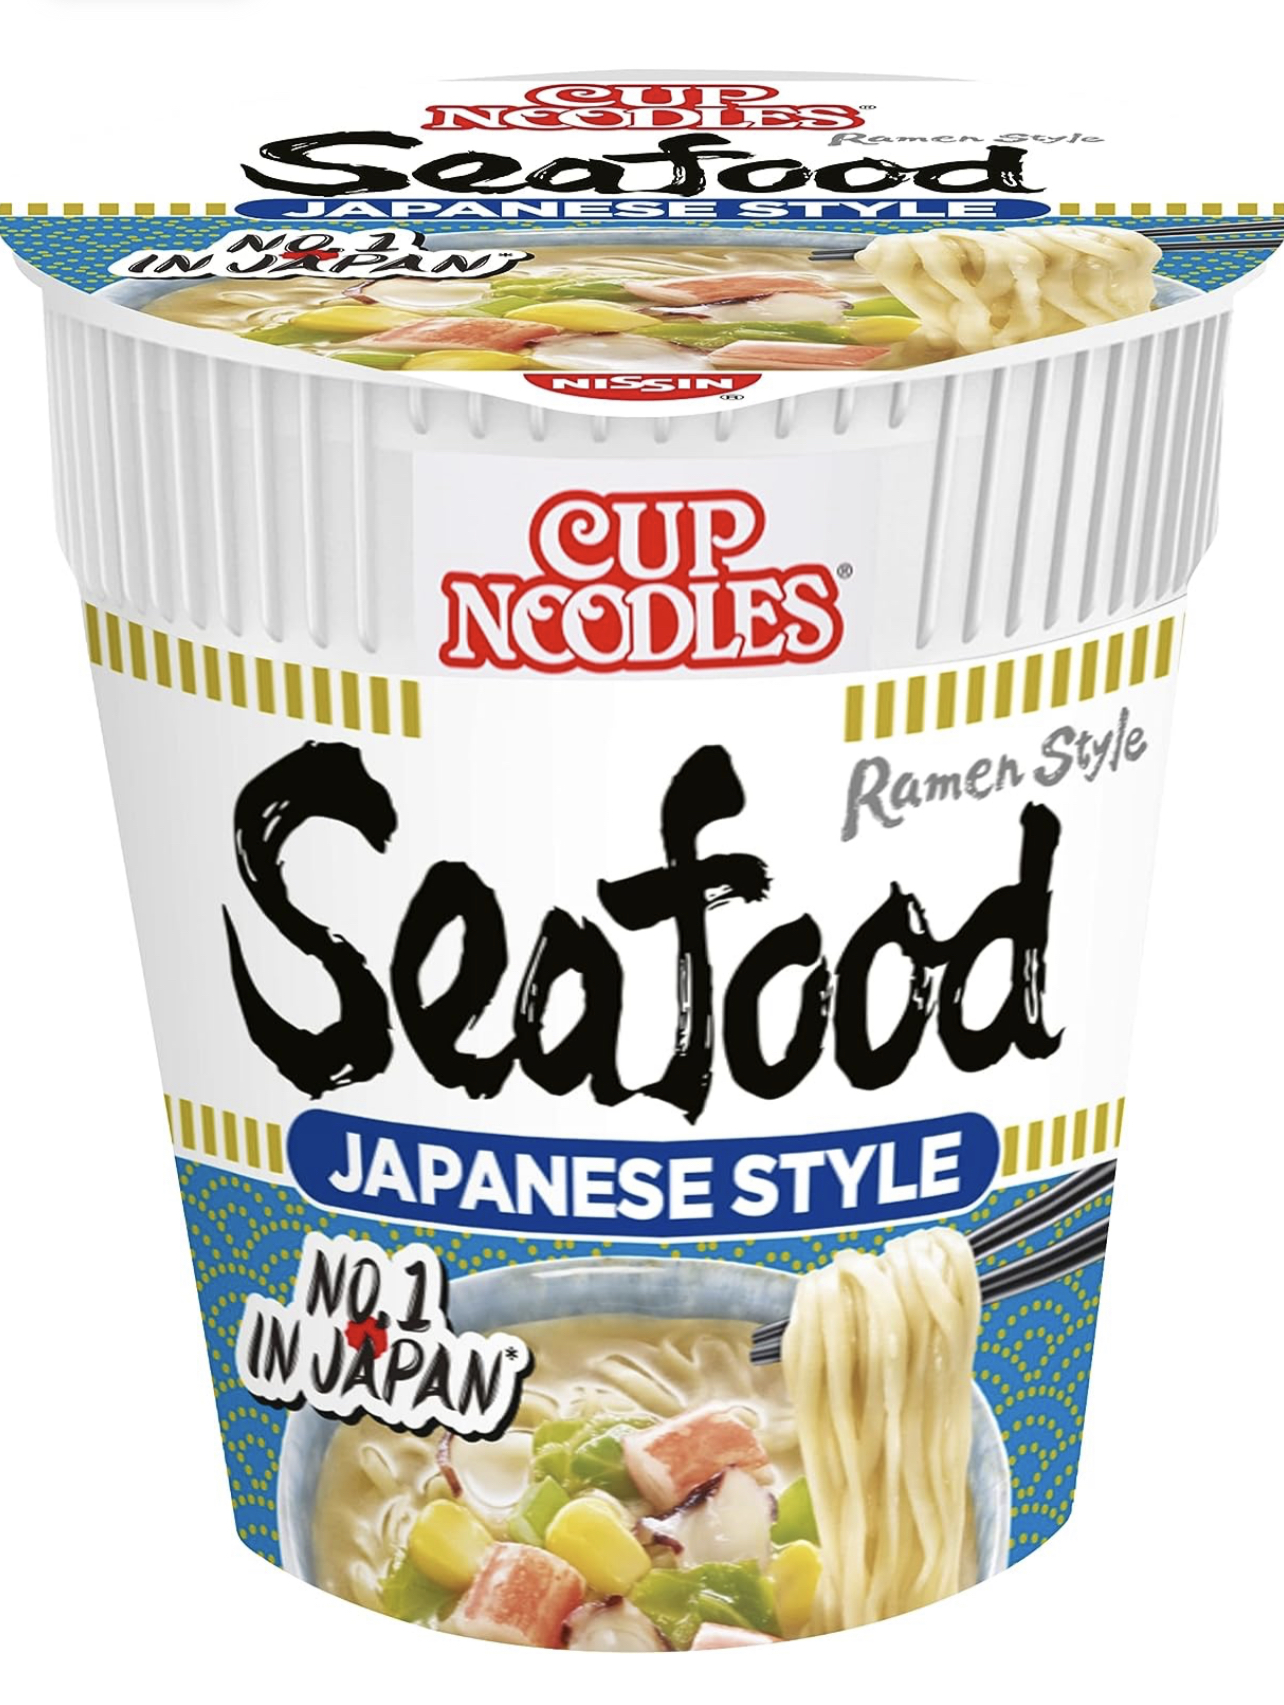 Pistonheads - The image features a cup of instant noodles from the brand Seafood. The packaging is predominantly white with accents of blue and red, highlighting the product's name in bold black text. The cup is adorned with Japanese characters that read "Ramen Style", indicating the flavor of the noodles. Additionally, there are illustrations of a bowl of seafood noodles, reinforcing the product's theme. The cup also displays the flavor "Japanese Style" and the tagline "Noodles". The background is plain white, allowing the focus to remain on the product.